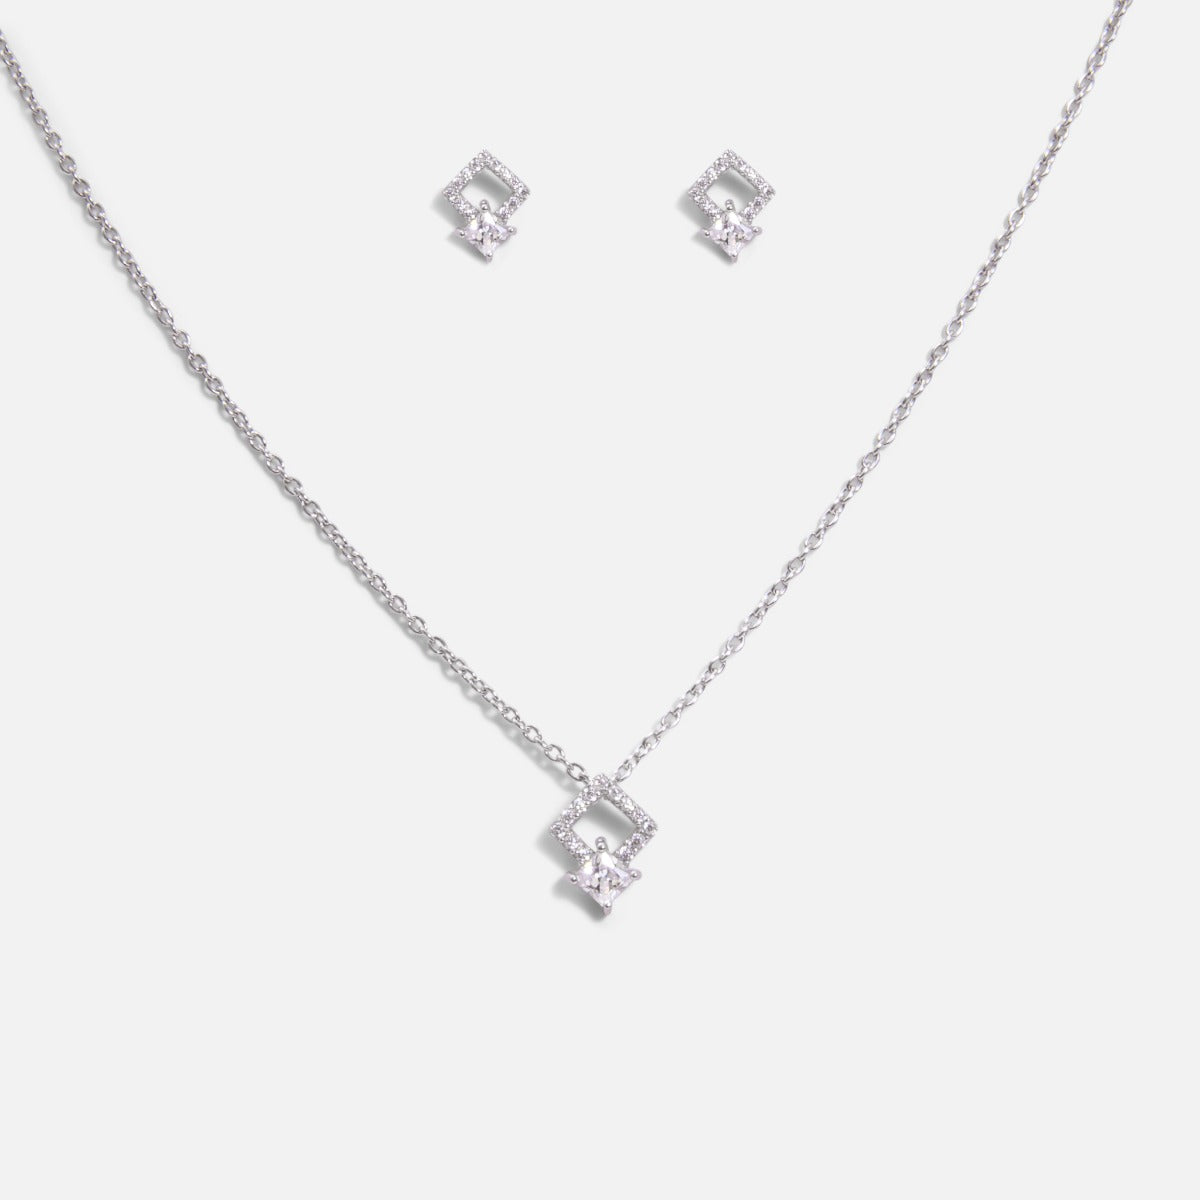 Sterling silver necklace and earrings set with square shaped cubic zirconia